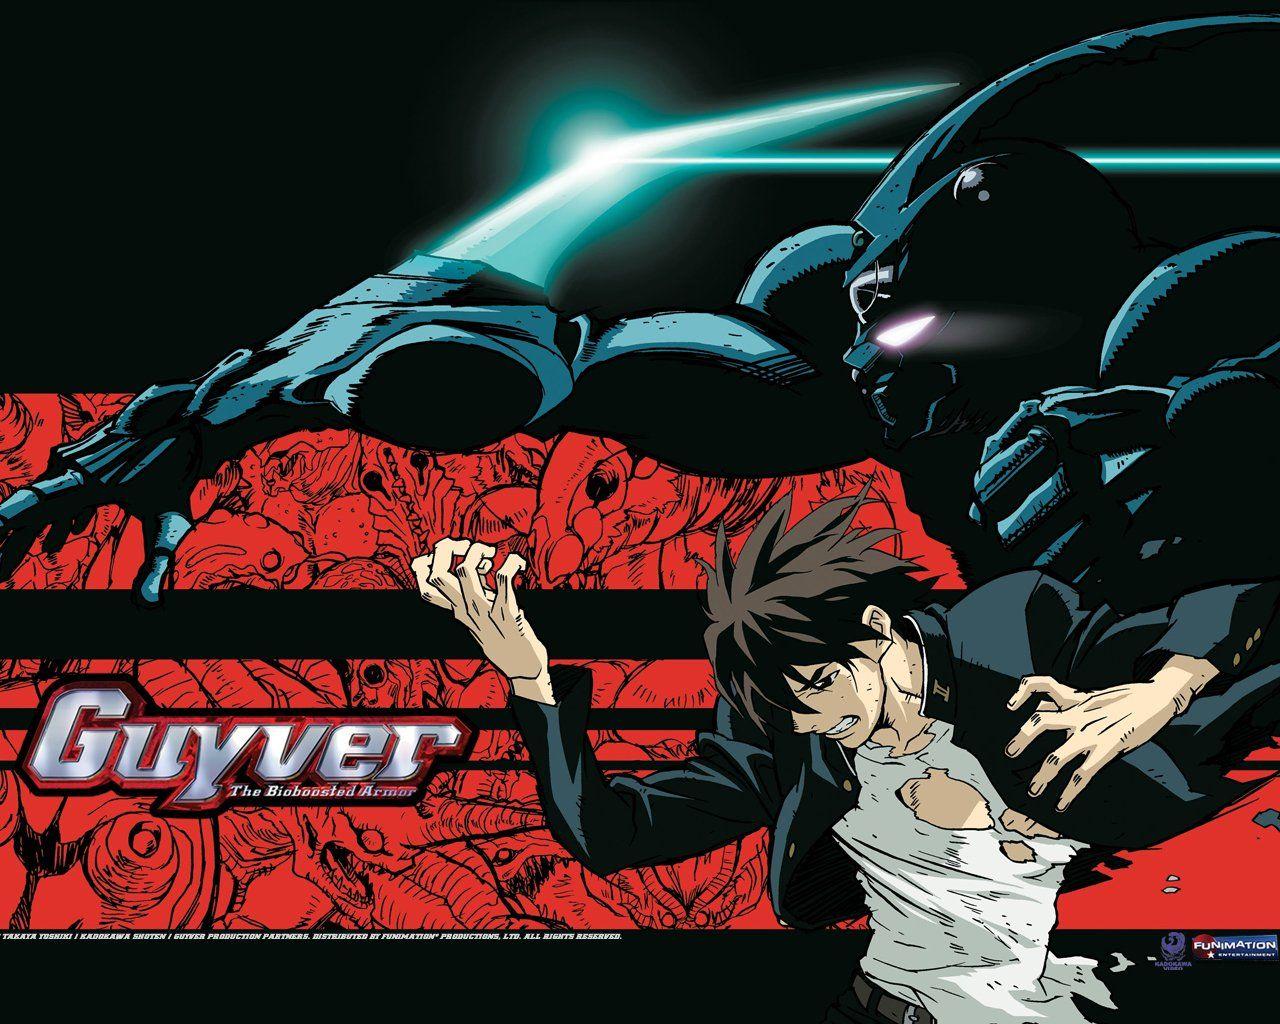 Guyver: The Bioboosted Armor (series, 2005 – 2006)